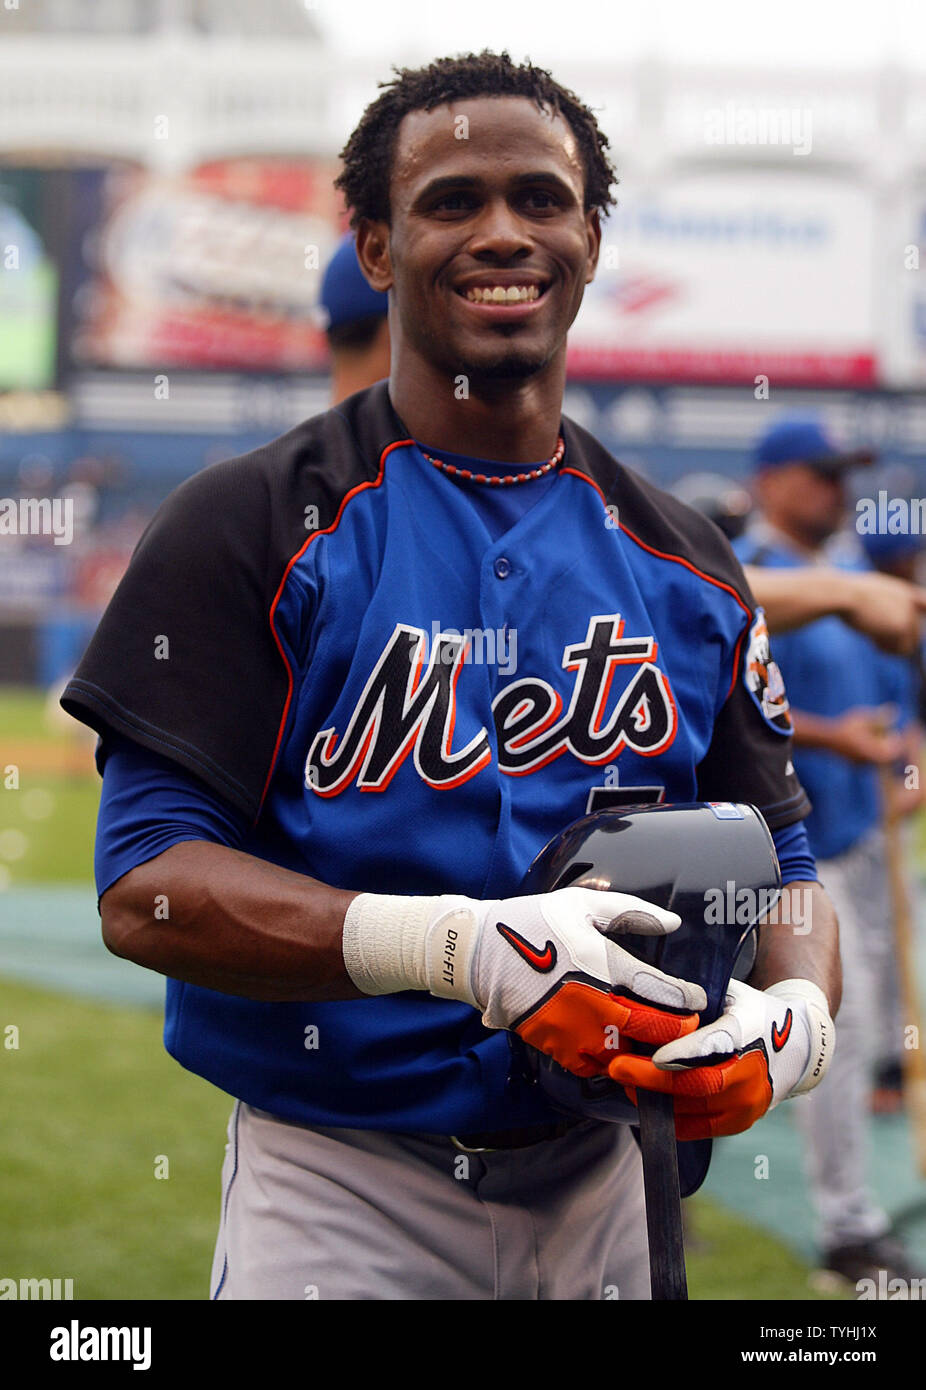 Jose Reyes warms up during batting practice prior to the New York